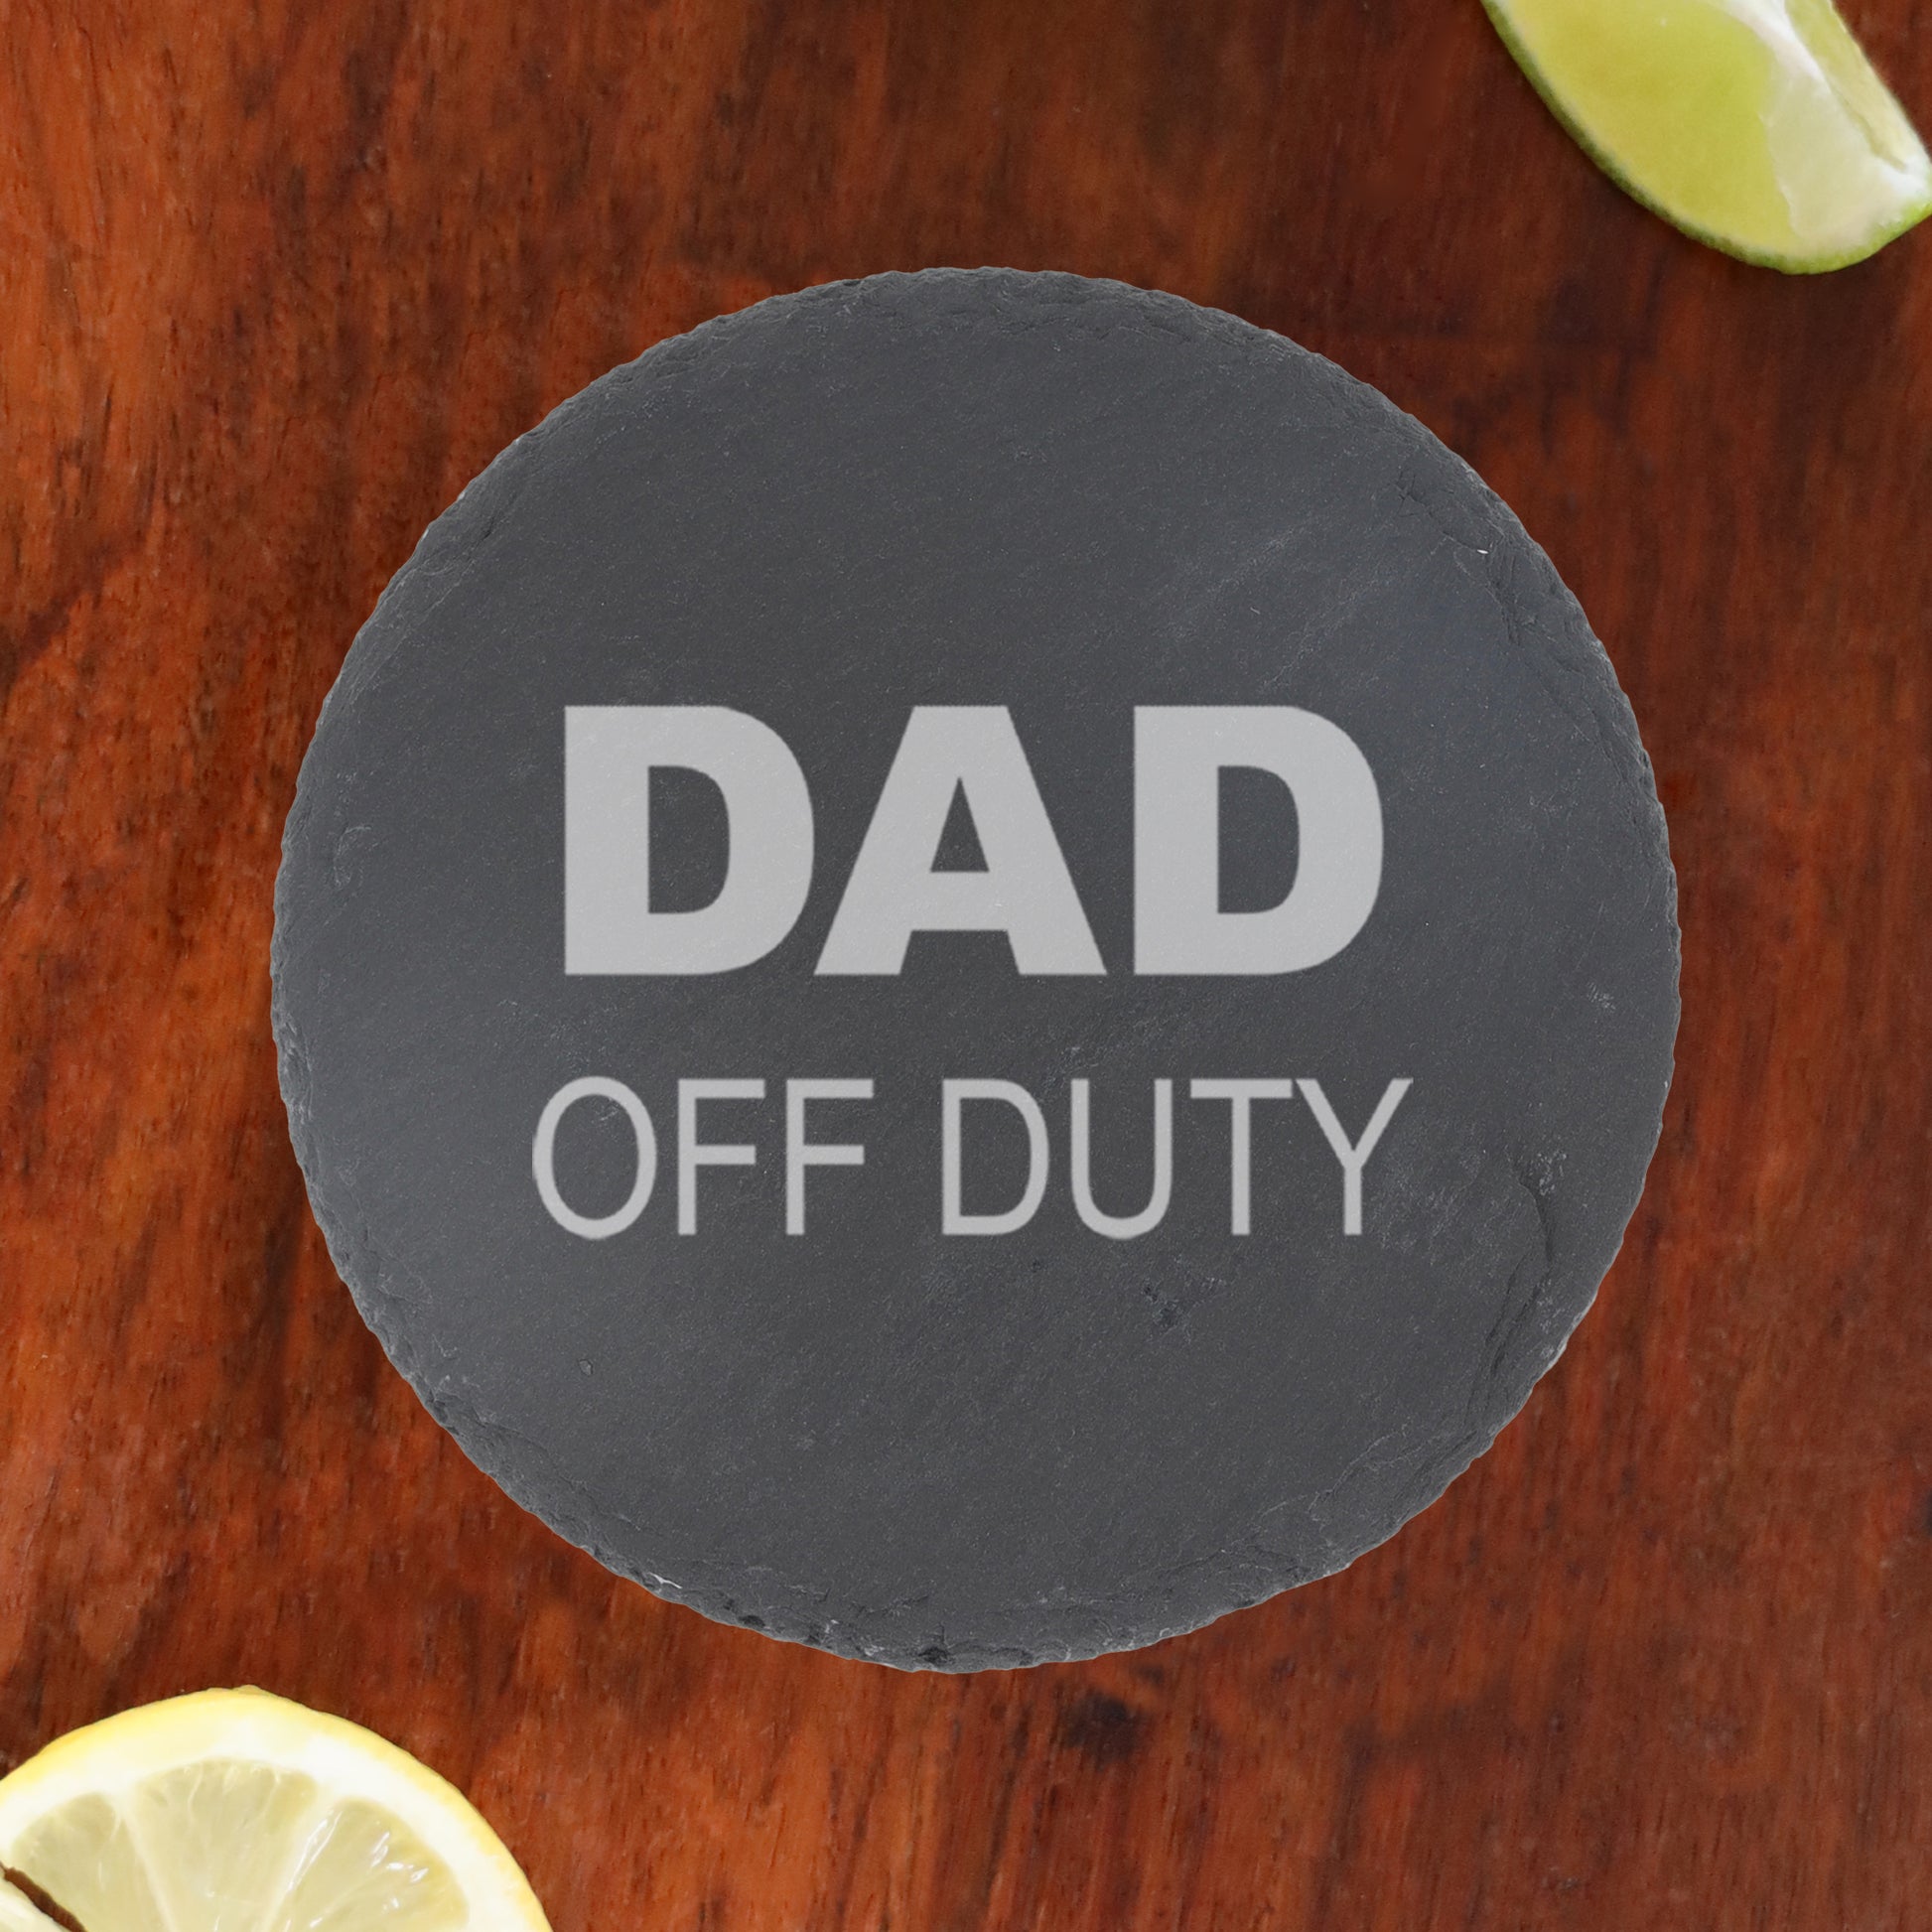 Engraved "Dad Off Duty" Novelty Whisky Glass and/or Coaster Set  - Always Looking Good - Round Coaster Only  